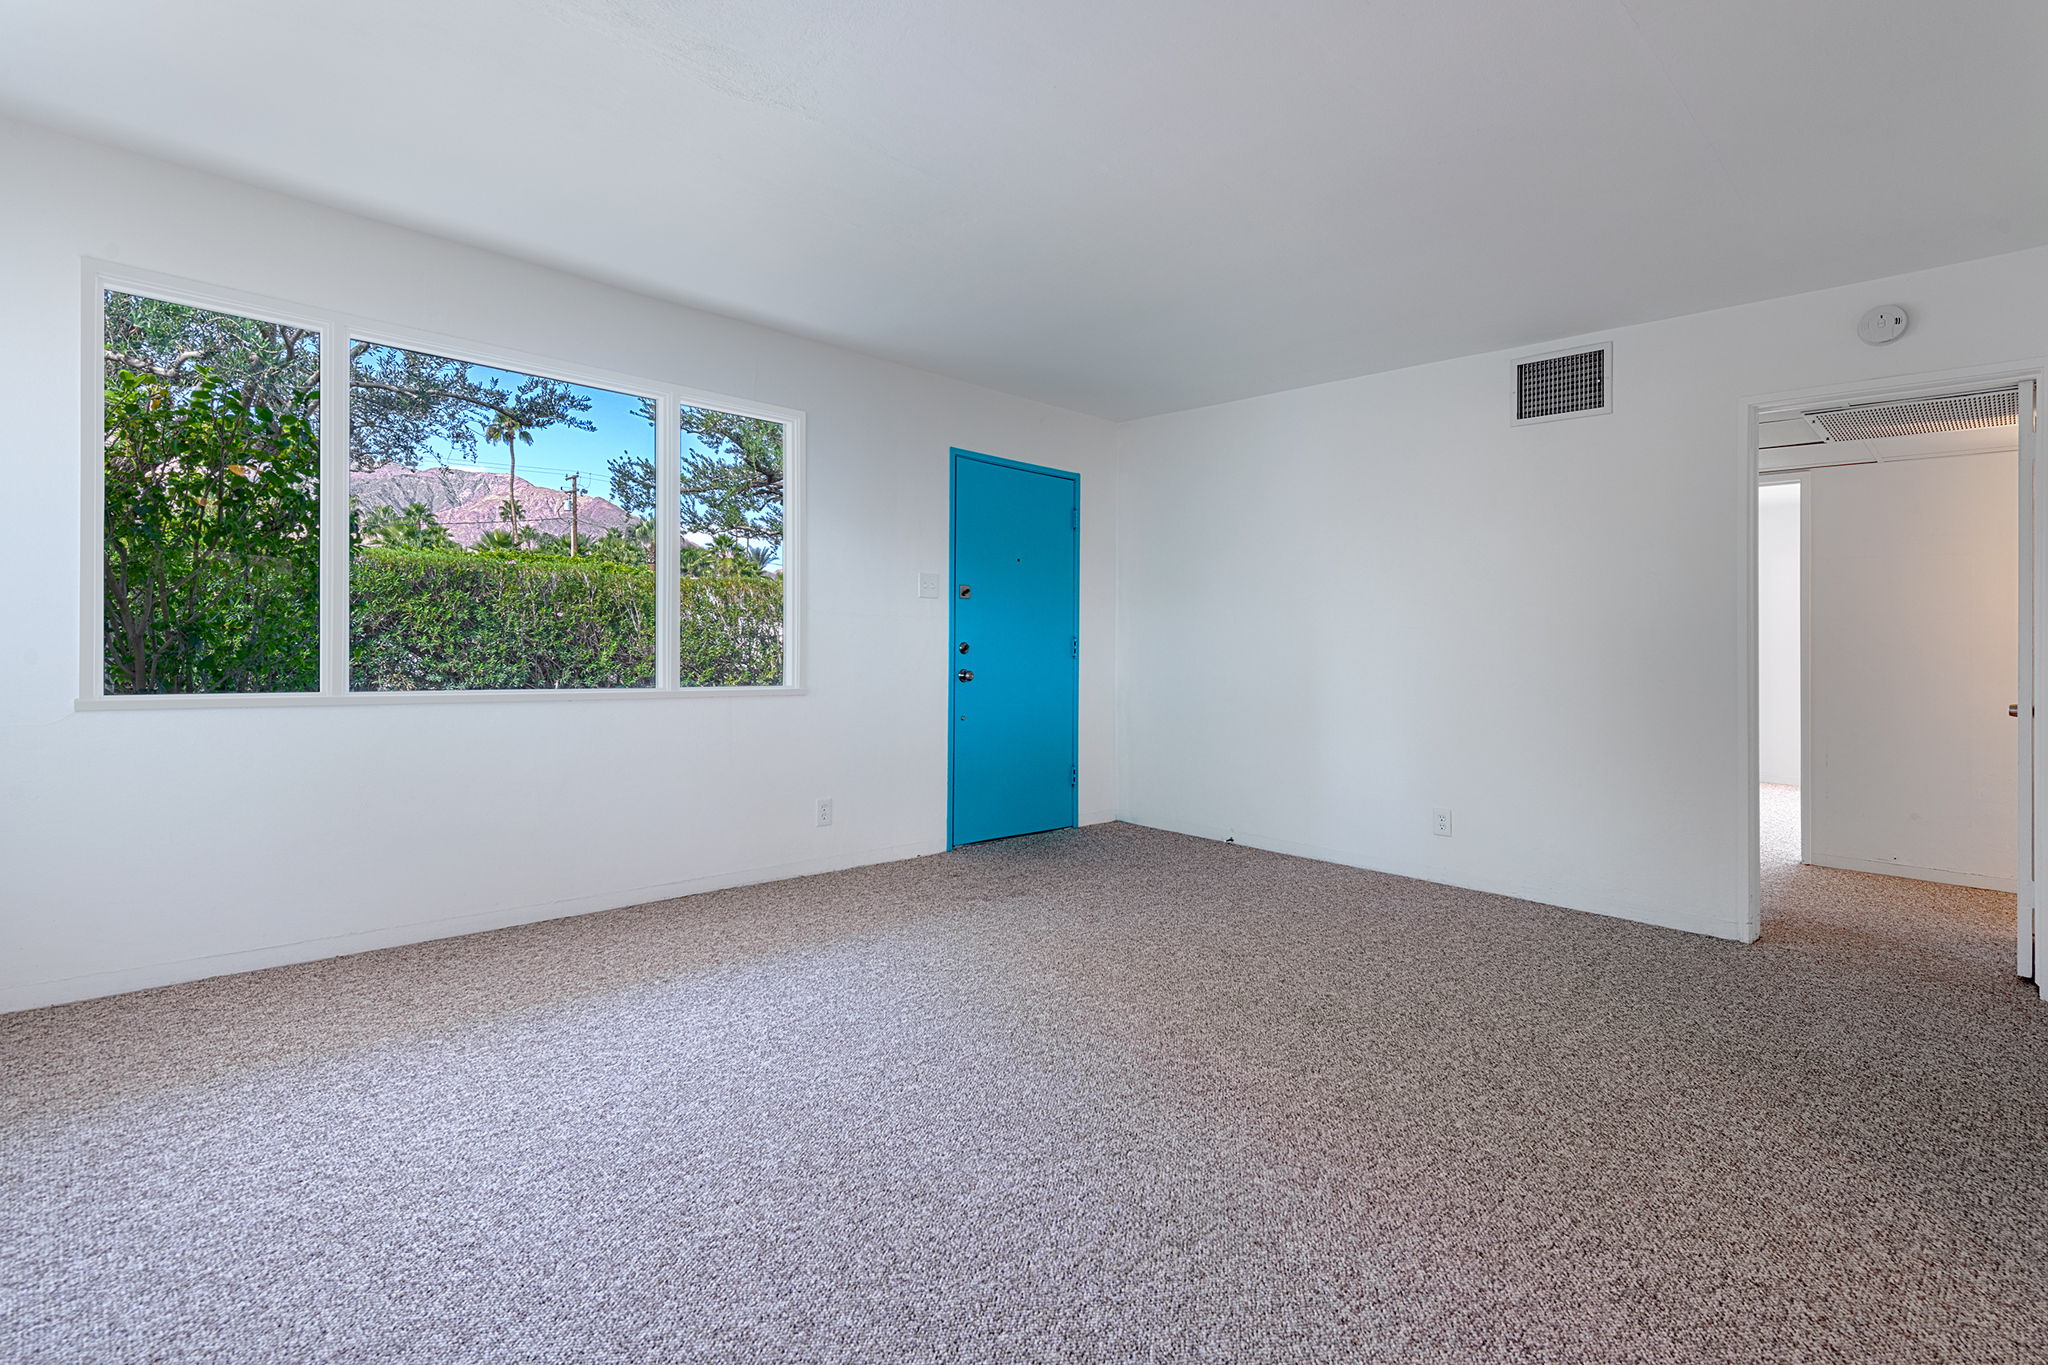  1134 N Calle Rolph, Palm Springs, CA 92262, US Photo 4